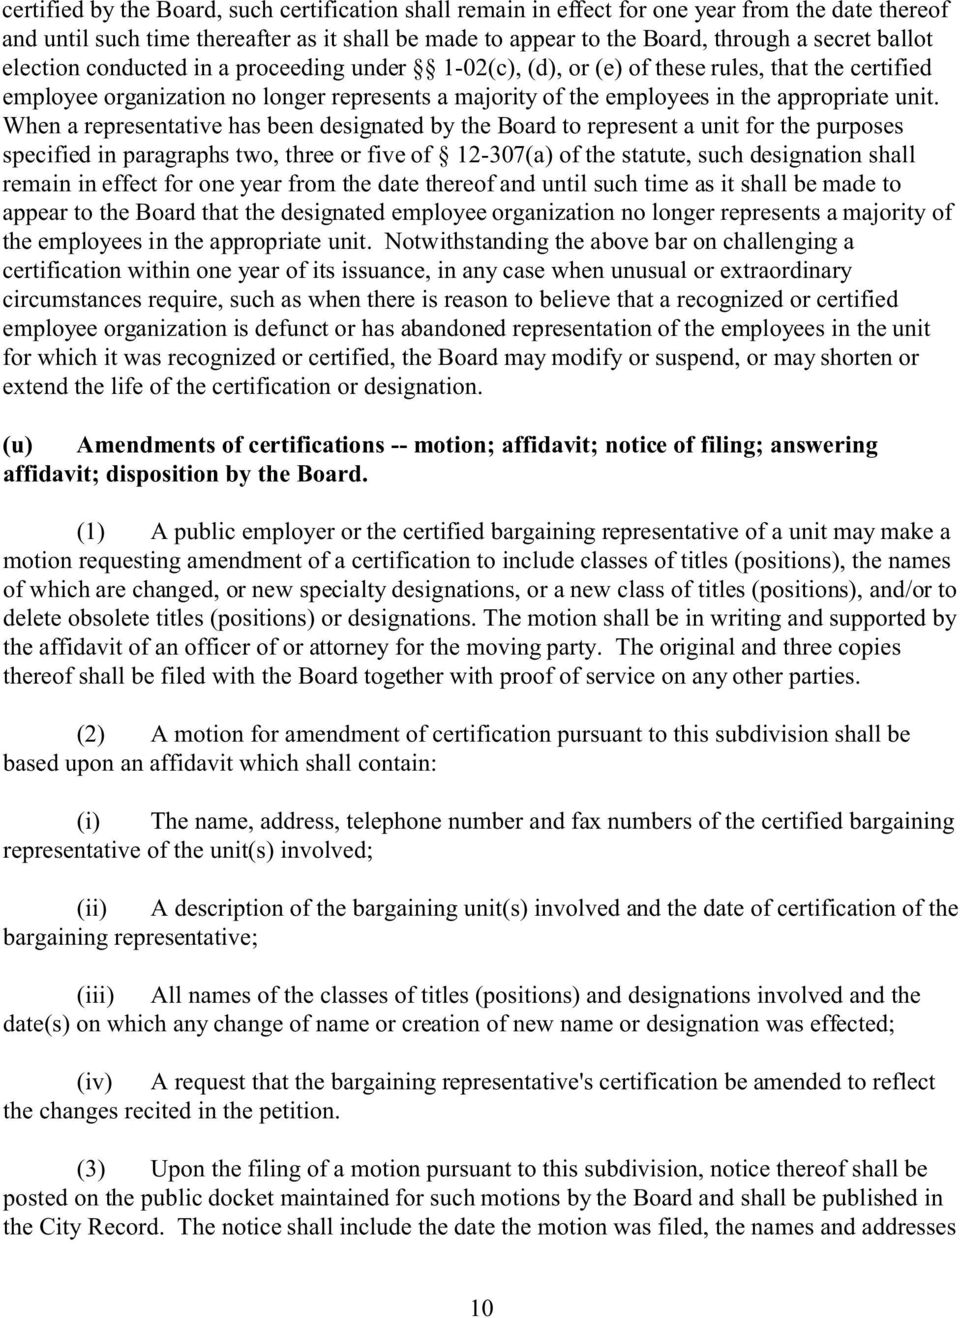 When a representative has been designated by the Board to represent a unit for the purposes specified in paragraphs two, three or five of 12-307(a) of the statute, such designation shall remain in